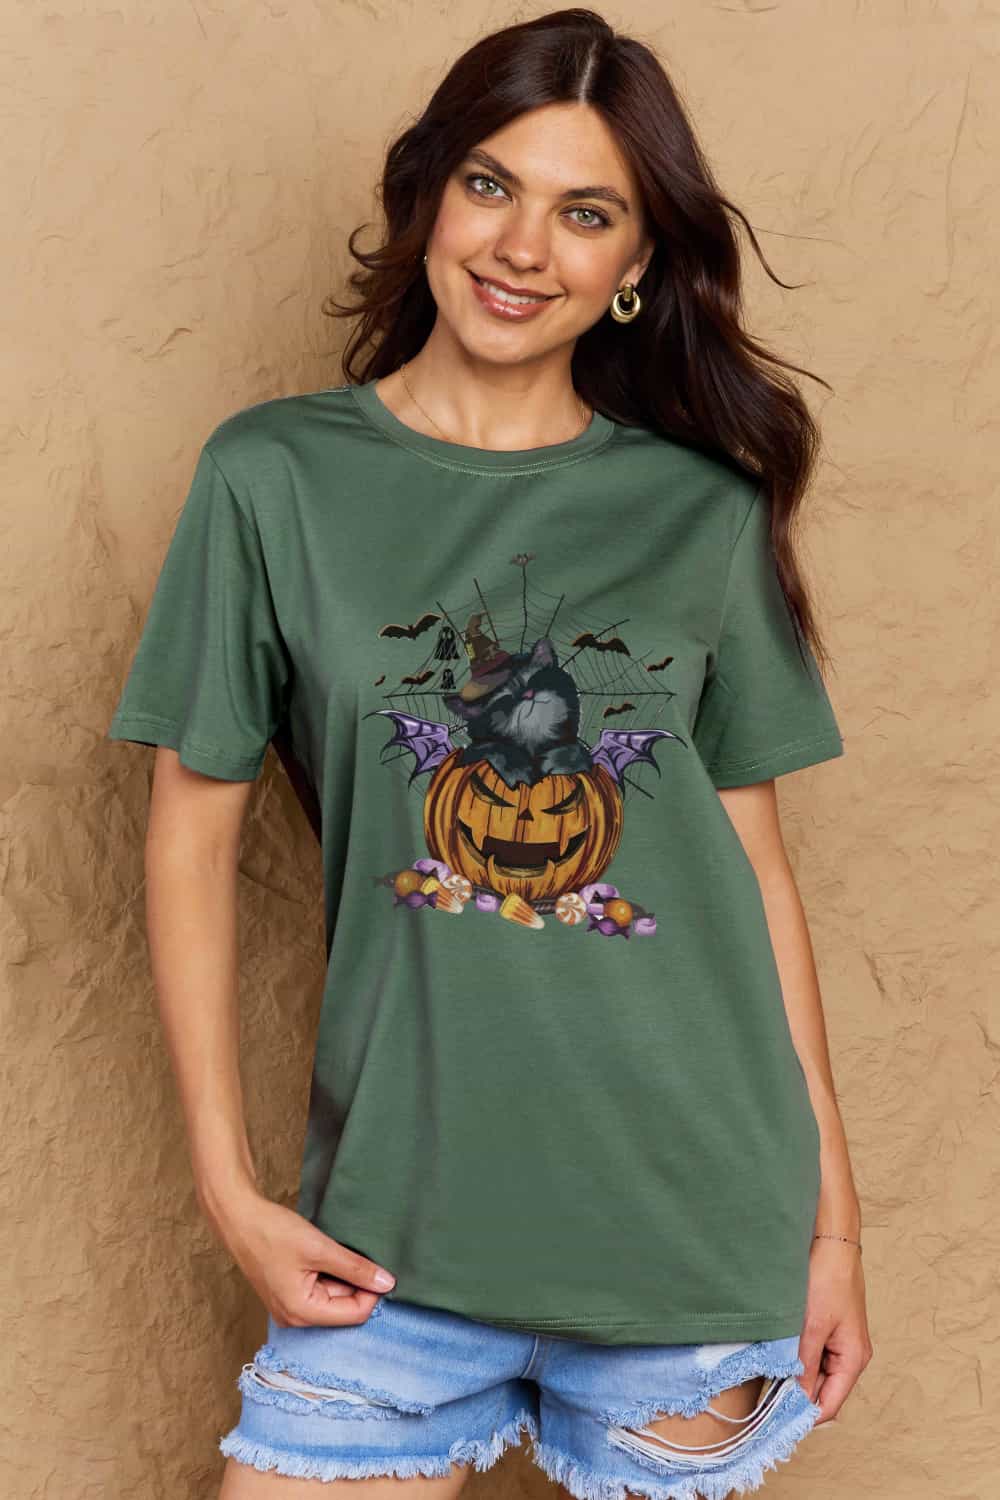 Simply Love Full Size Jack-O'-Lantern Graphic T-Shirt - GemThreads Boutique